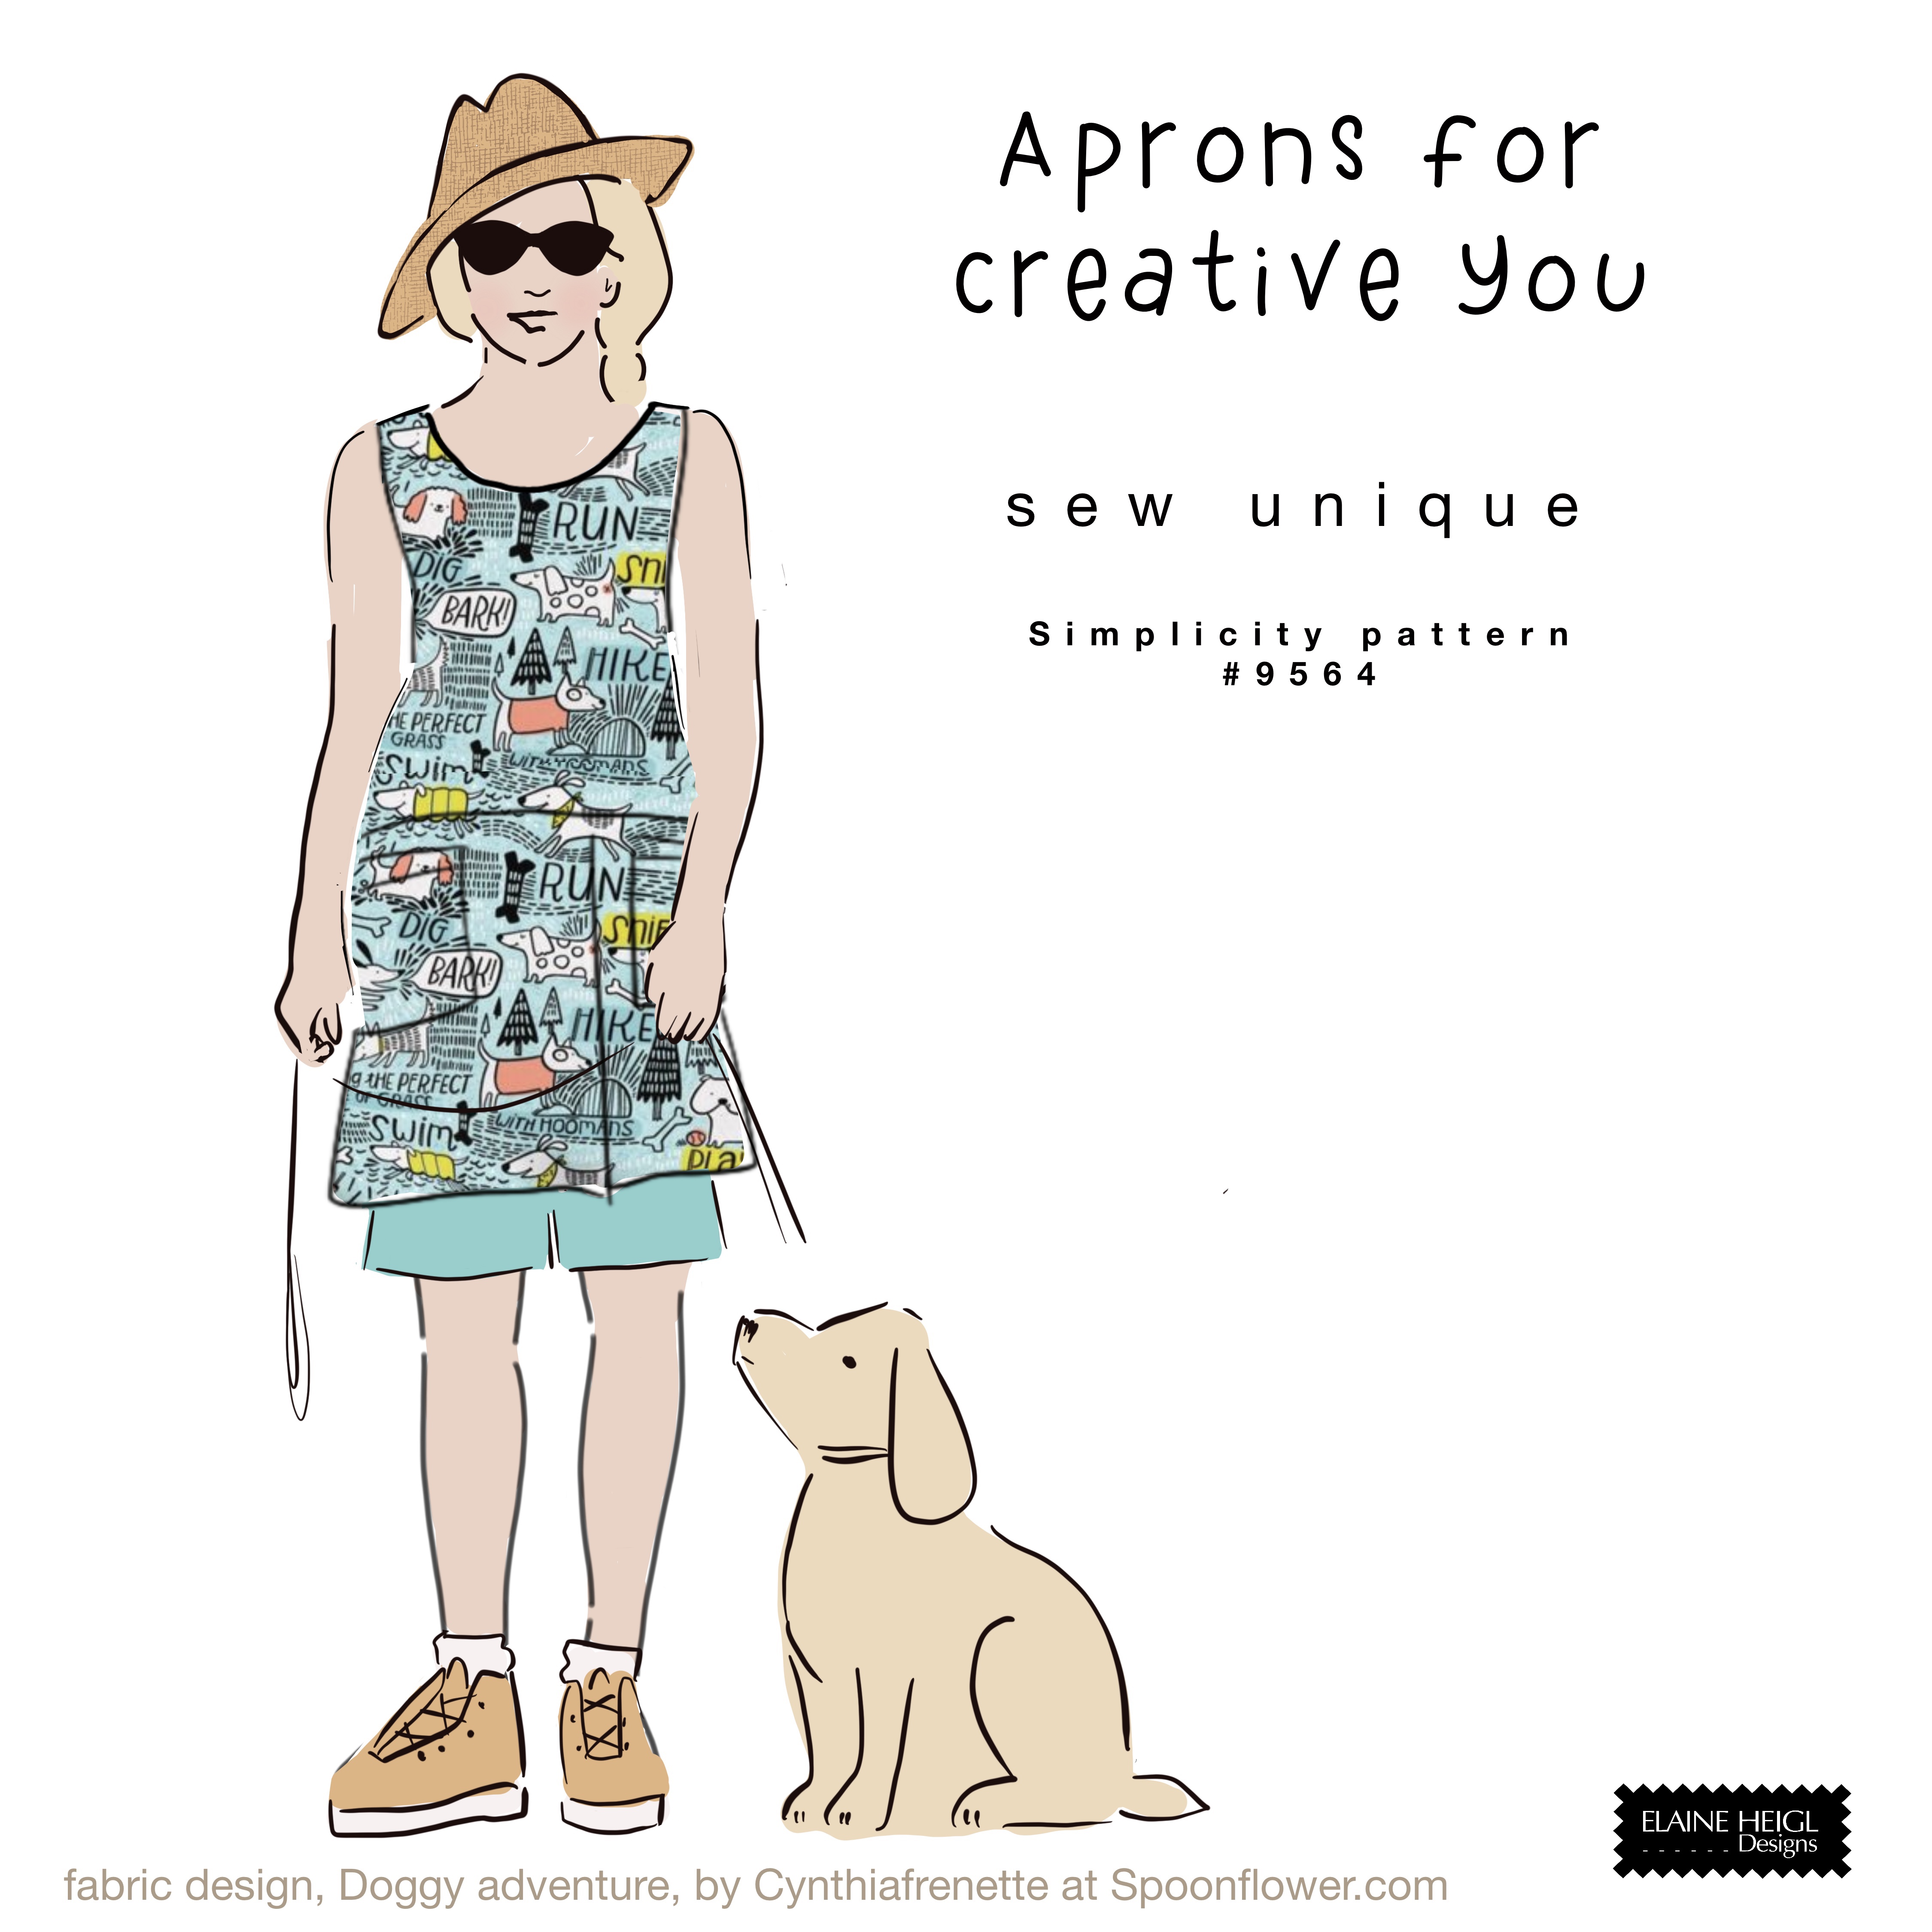 SEW APRON LAYERS FOR CREATIVE YOU